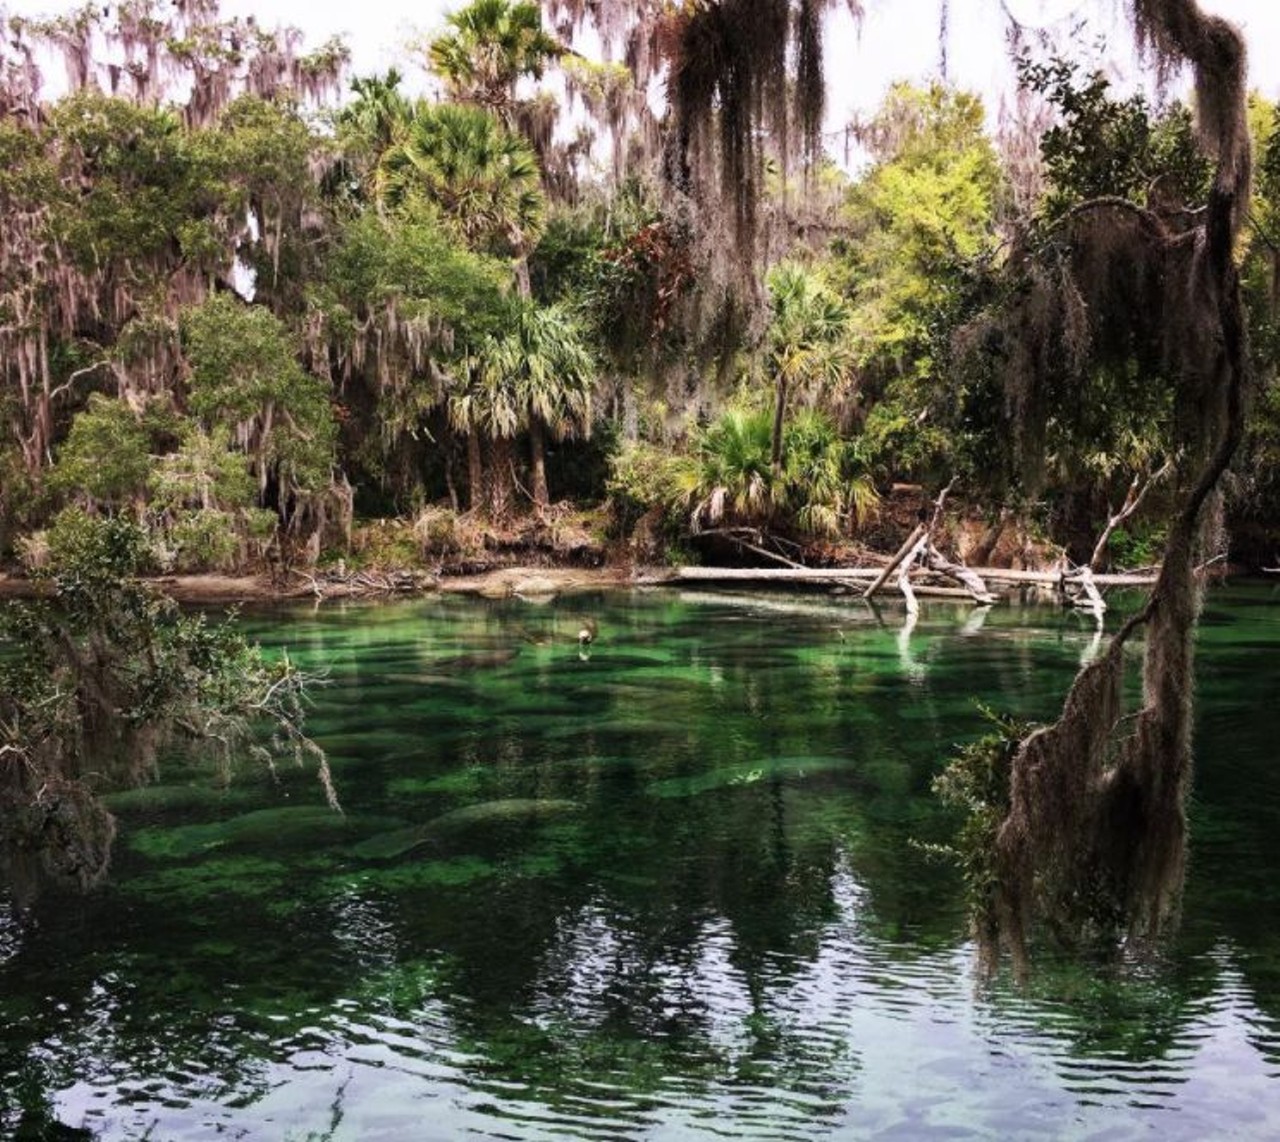 Blue Spring State Park
2100 W French Ave, Orange City, FL 32763; 50 minutes from Orlando 
Claiming the title of the biggest spring found on the St. John&#146;s River, this stop on the list is manatee heaven from the middle of November until the end of March. Any in-water activity is put to a halt during this time, but once the park fully reopens, attendees can enjoy some snorkeling, boating, fishing, tubing and, if you&#146;re certified, scuba diving. 
Photo via atravelgirl12/Instagram